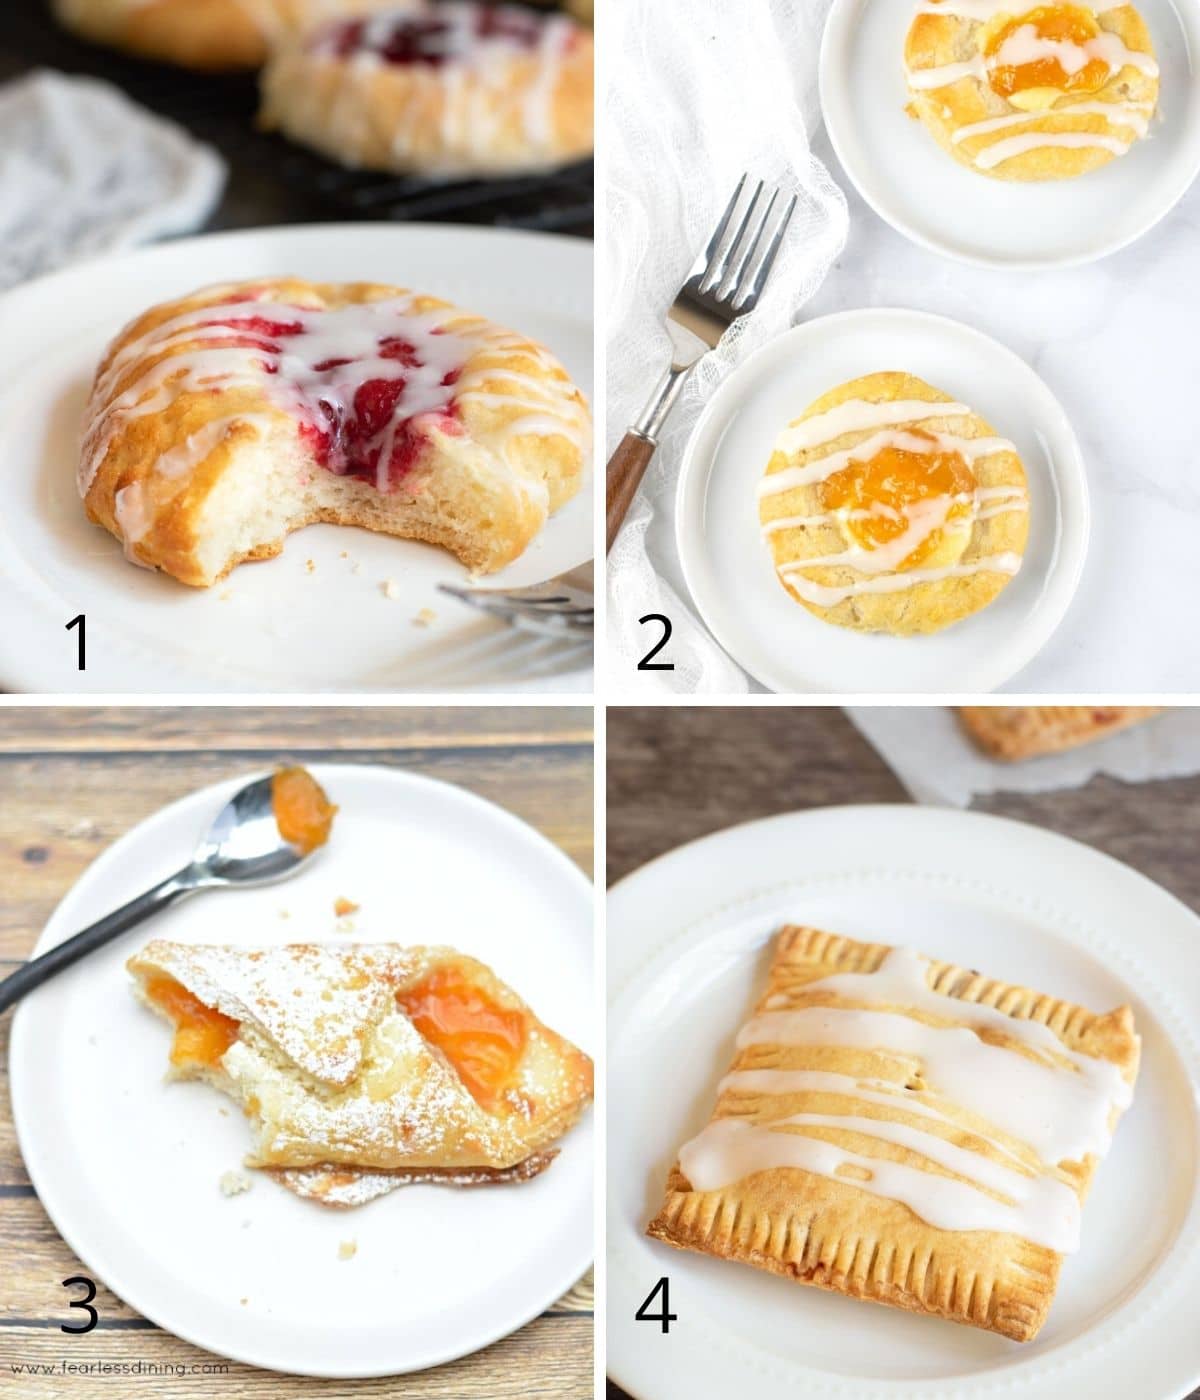 photos of the pastries.